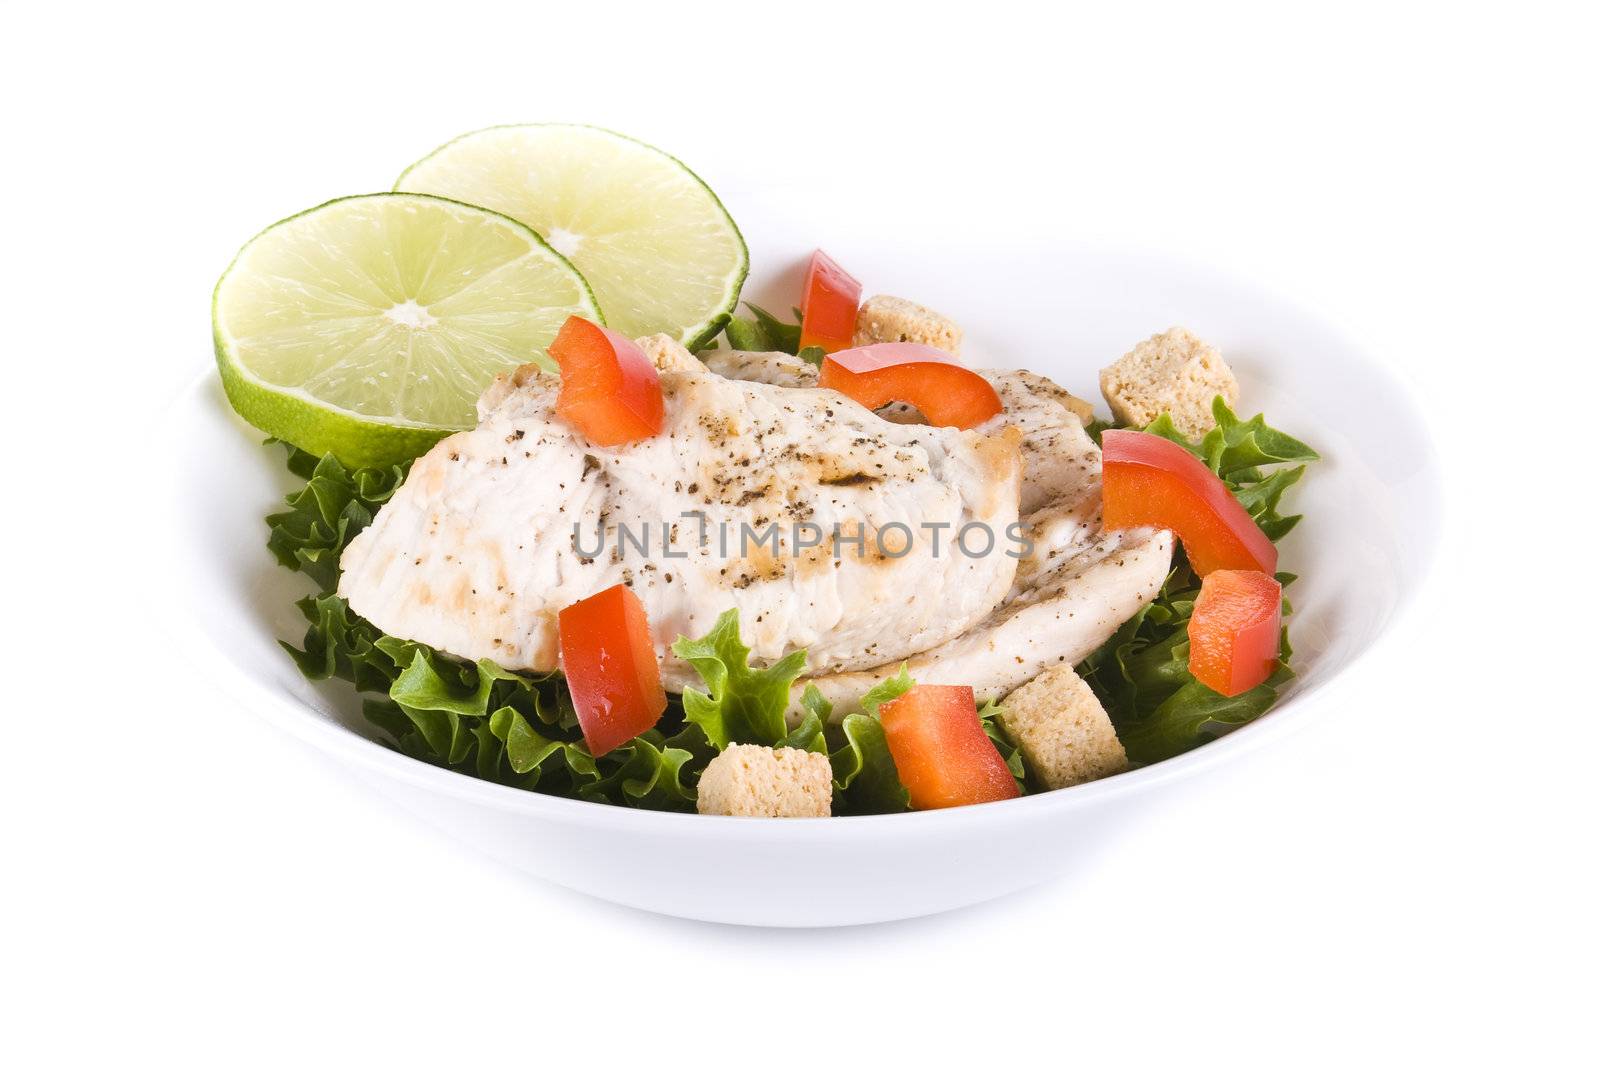 Chicken and vegetable  salad by caldix